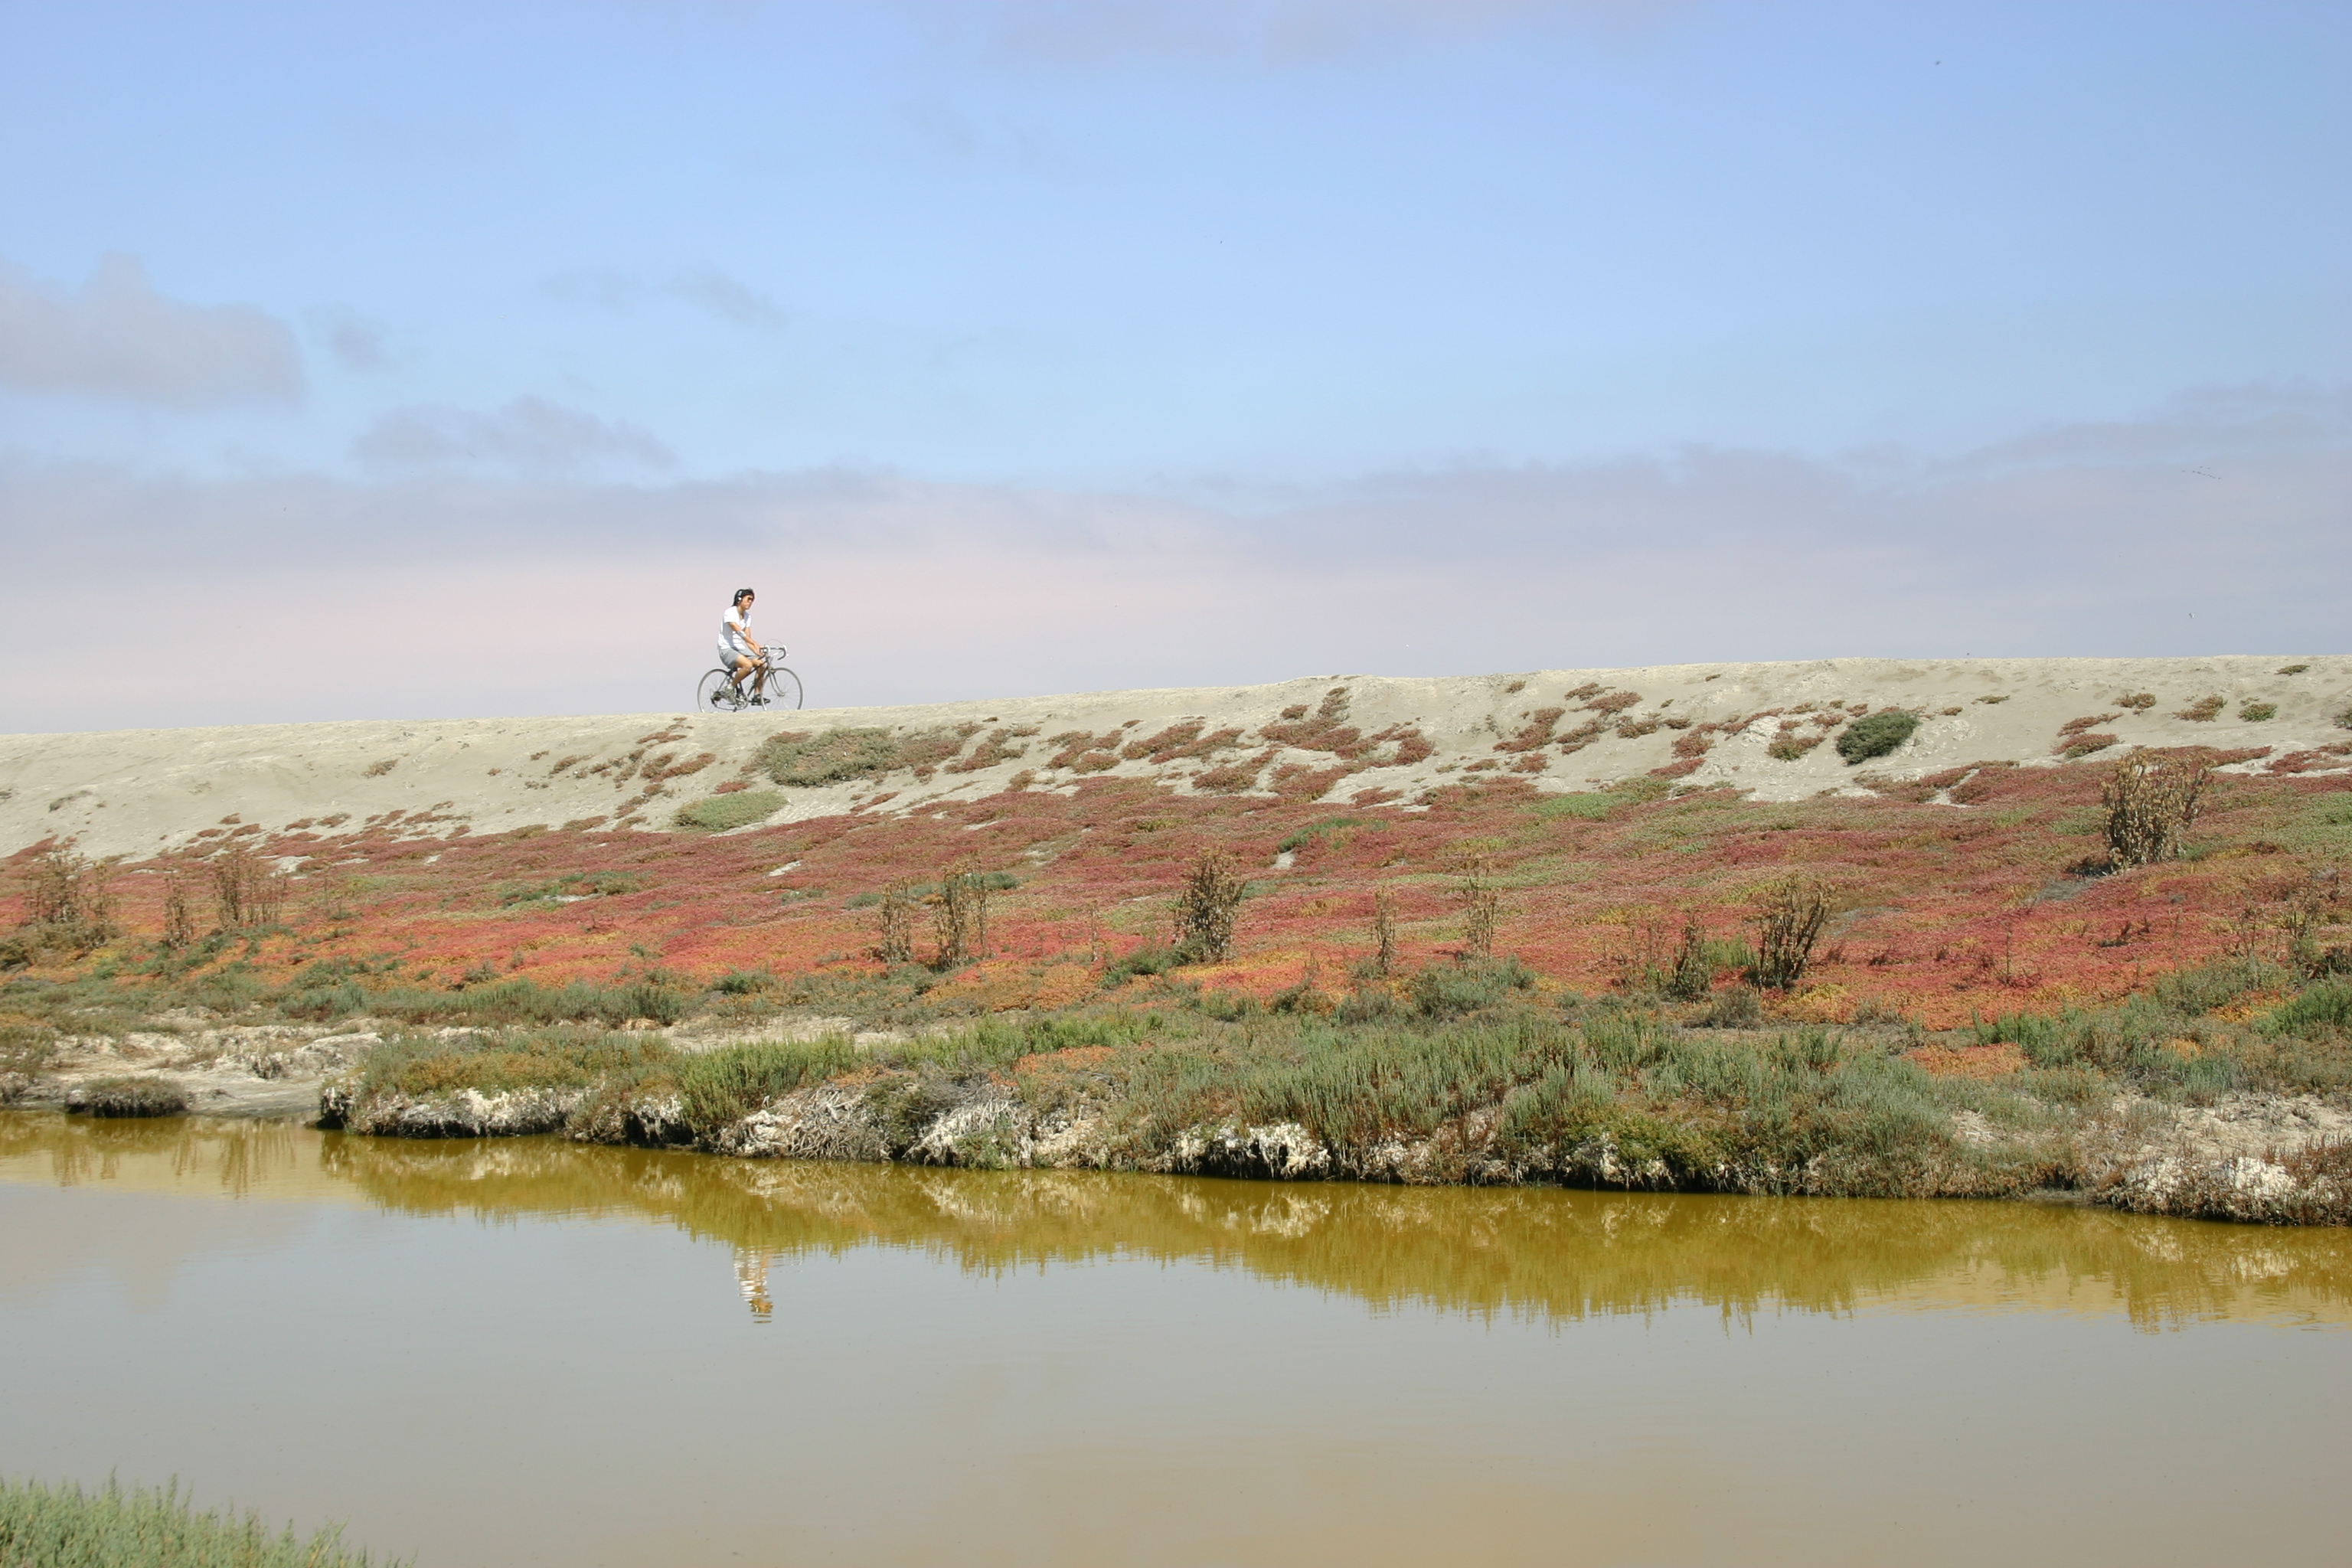 A cyclist reflected in the water of a salt marsh rides across the horizon.